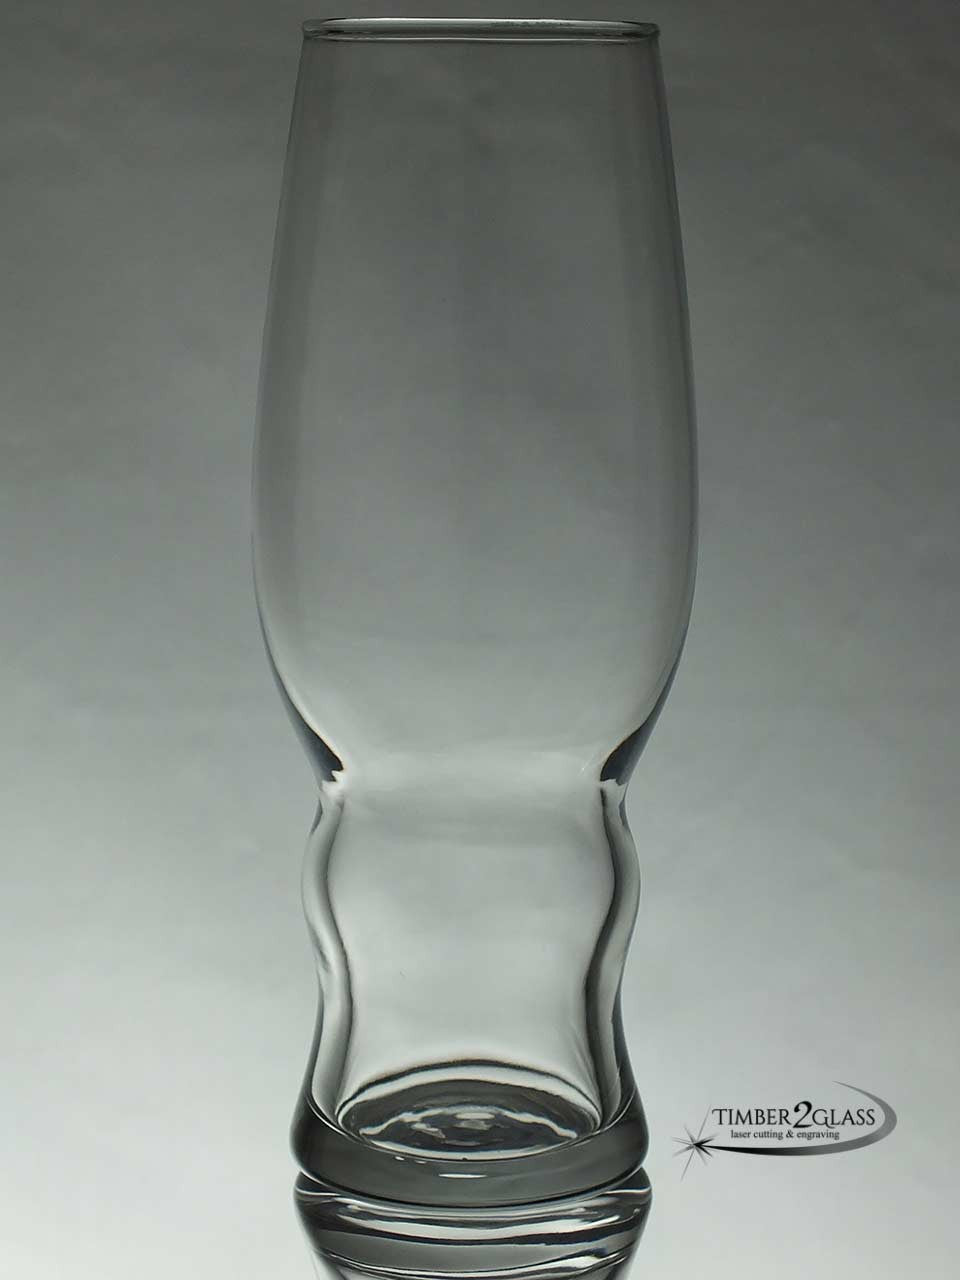 customize medford pilsner glass, personalize glass by Timber 2 Glass, laser engrave pilsner glass